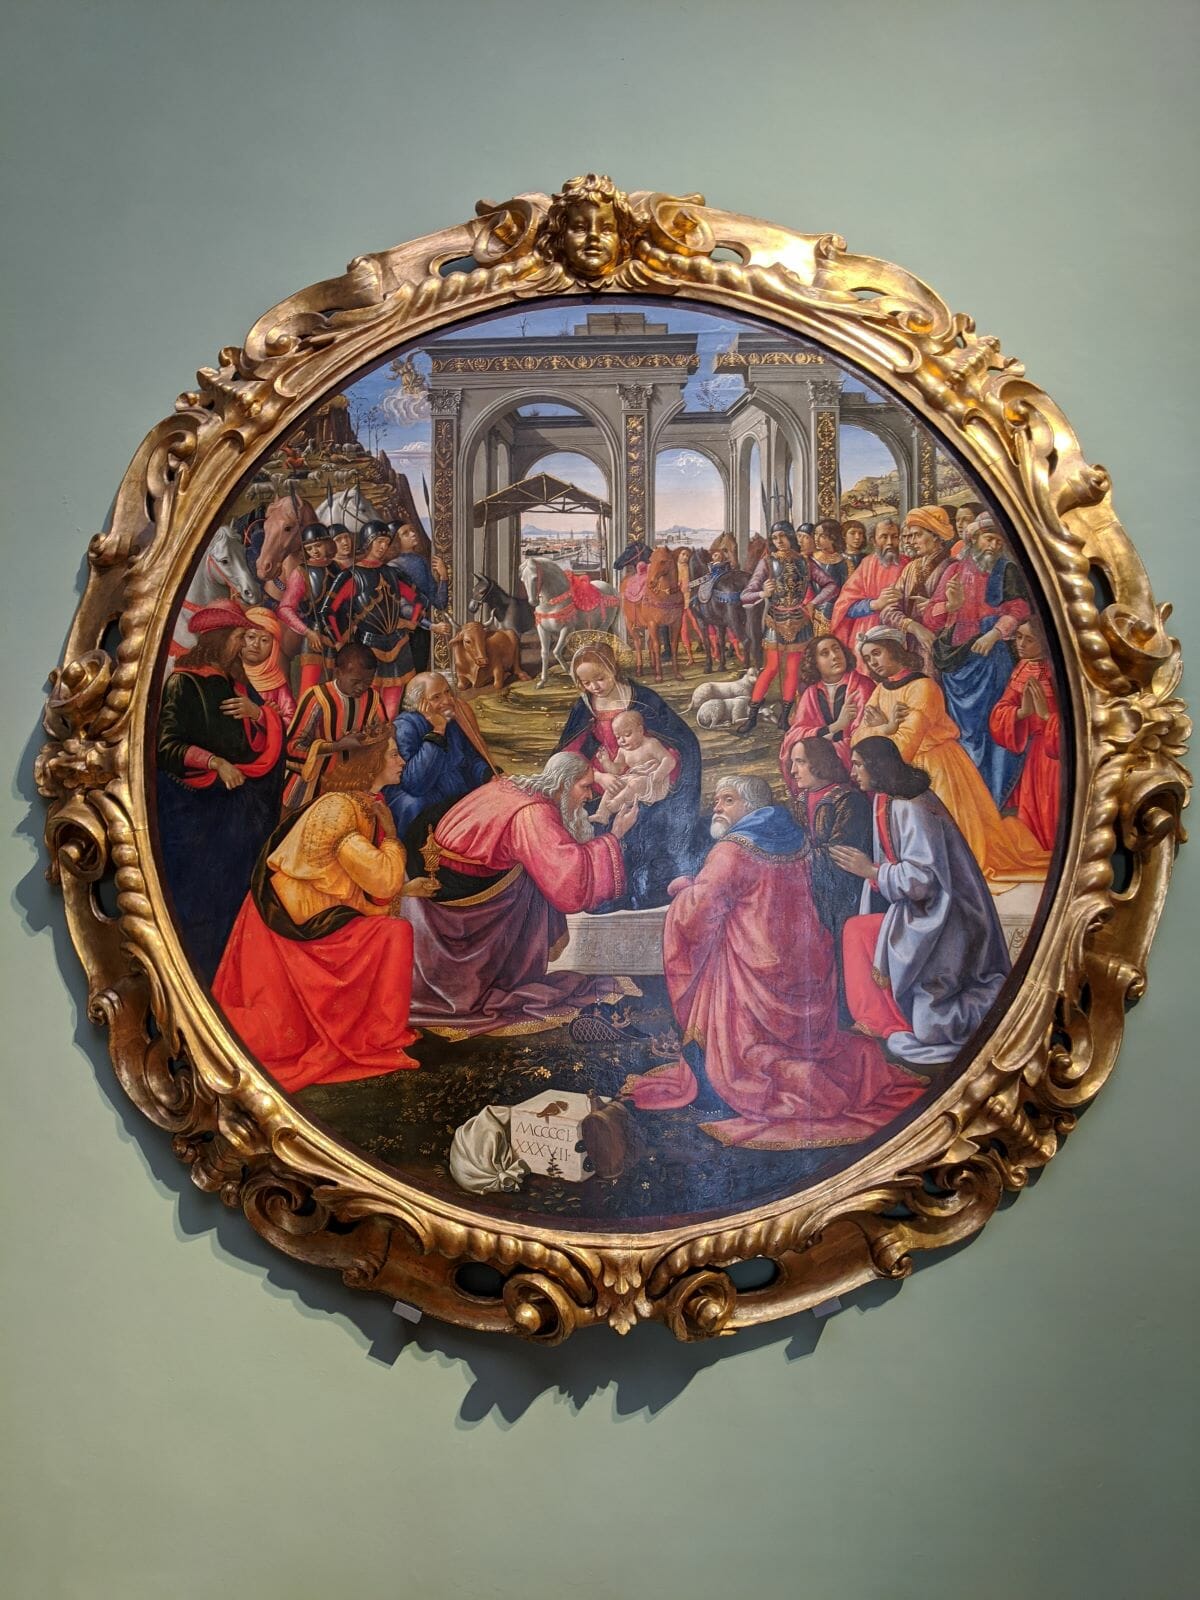 Painting in the Uffizi Gallery